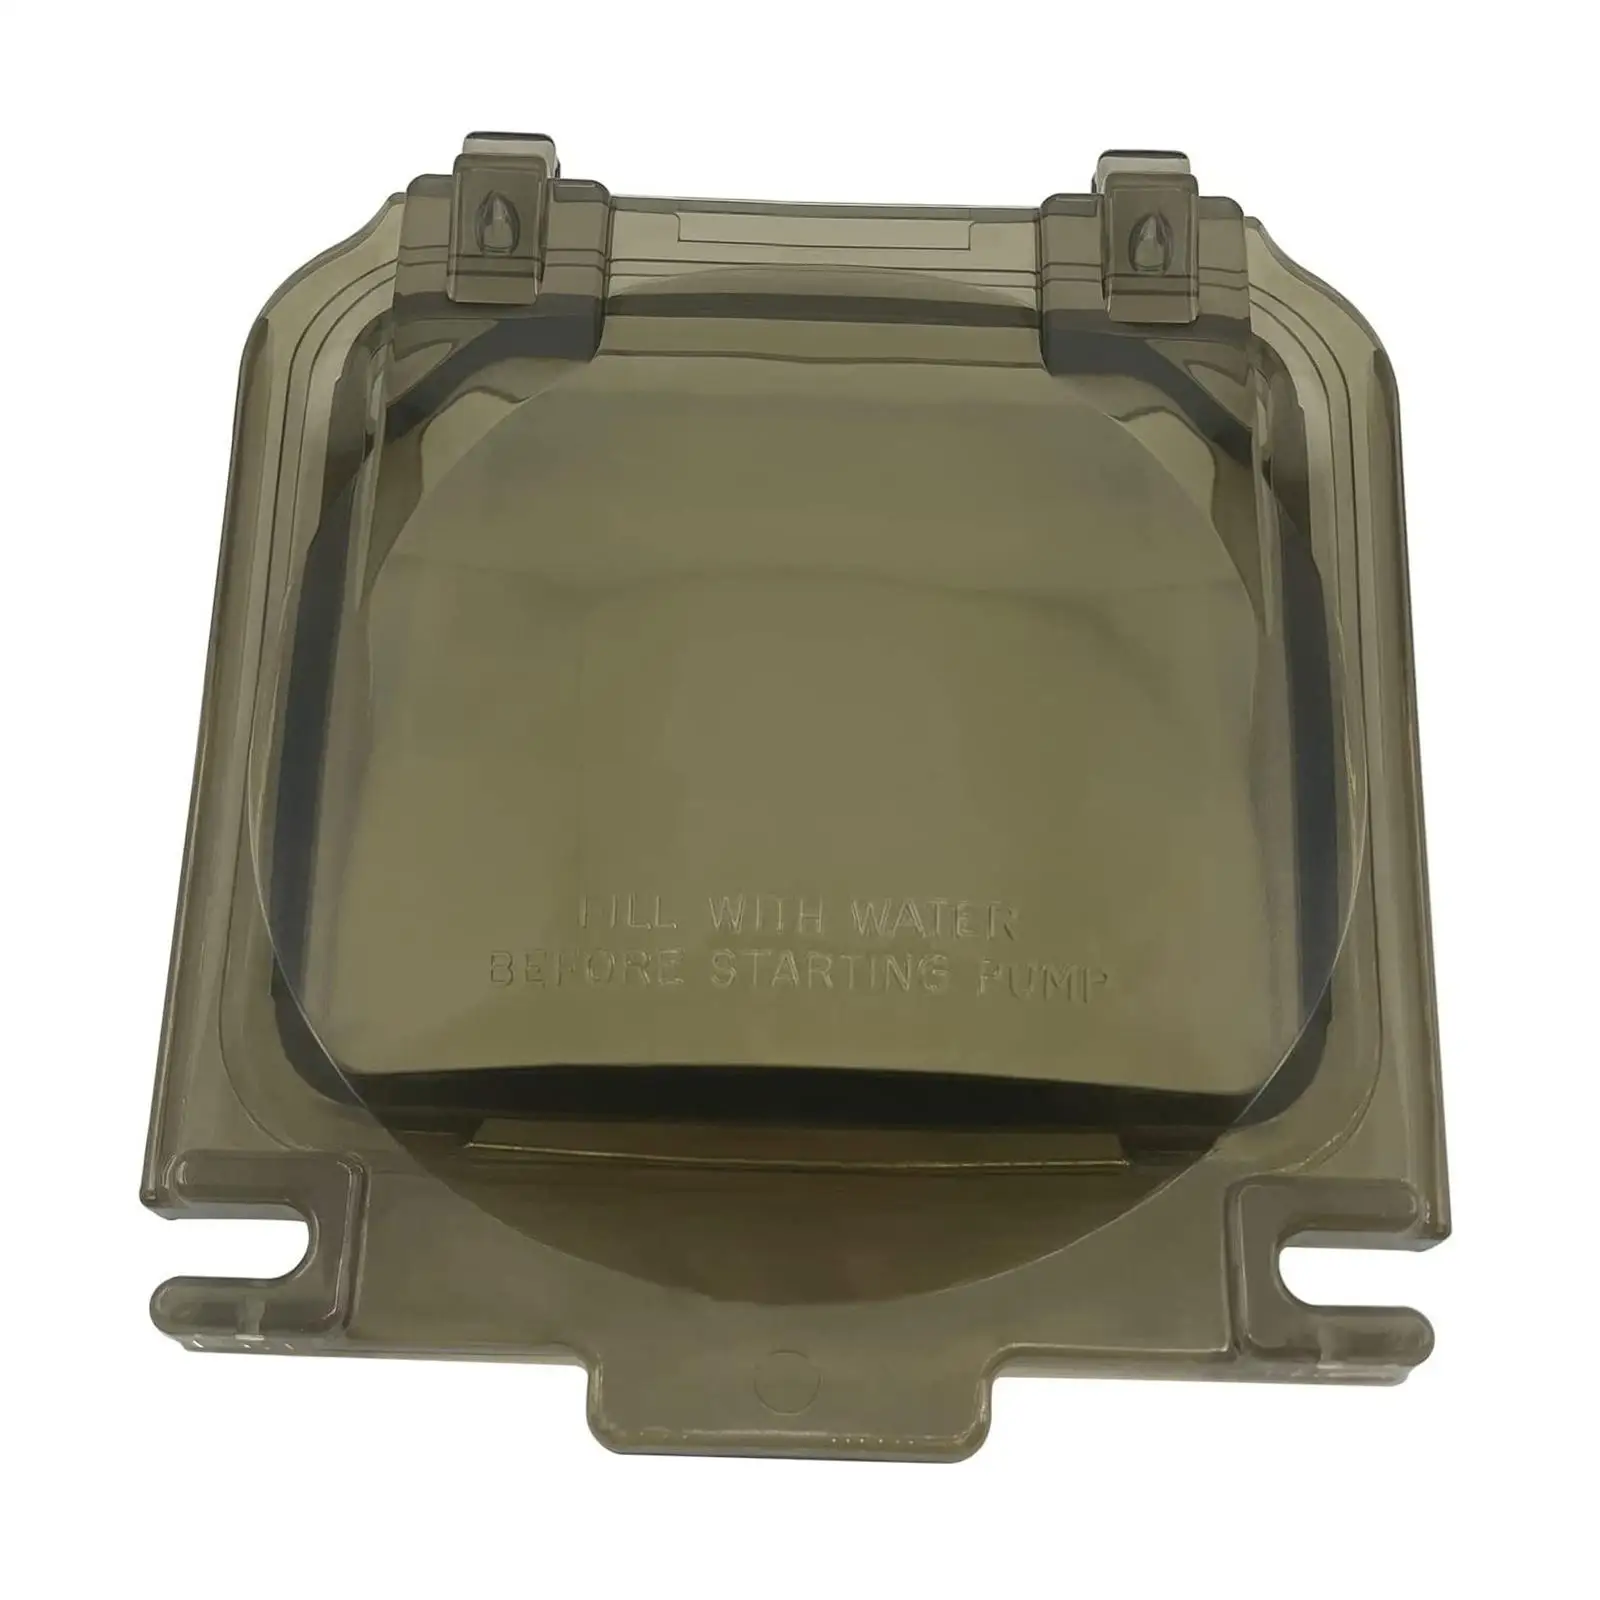 Pool Pump Lid Strain Cover with Gasket Swimming Pool Sand Filter Effective Pool Cleaning Tools Part Fittings for SP2600x Series